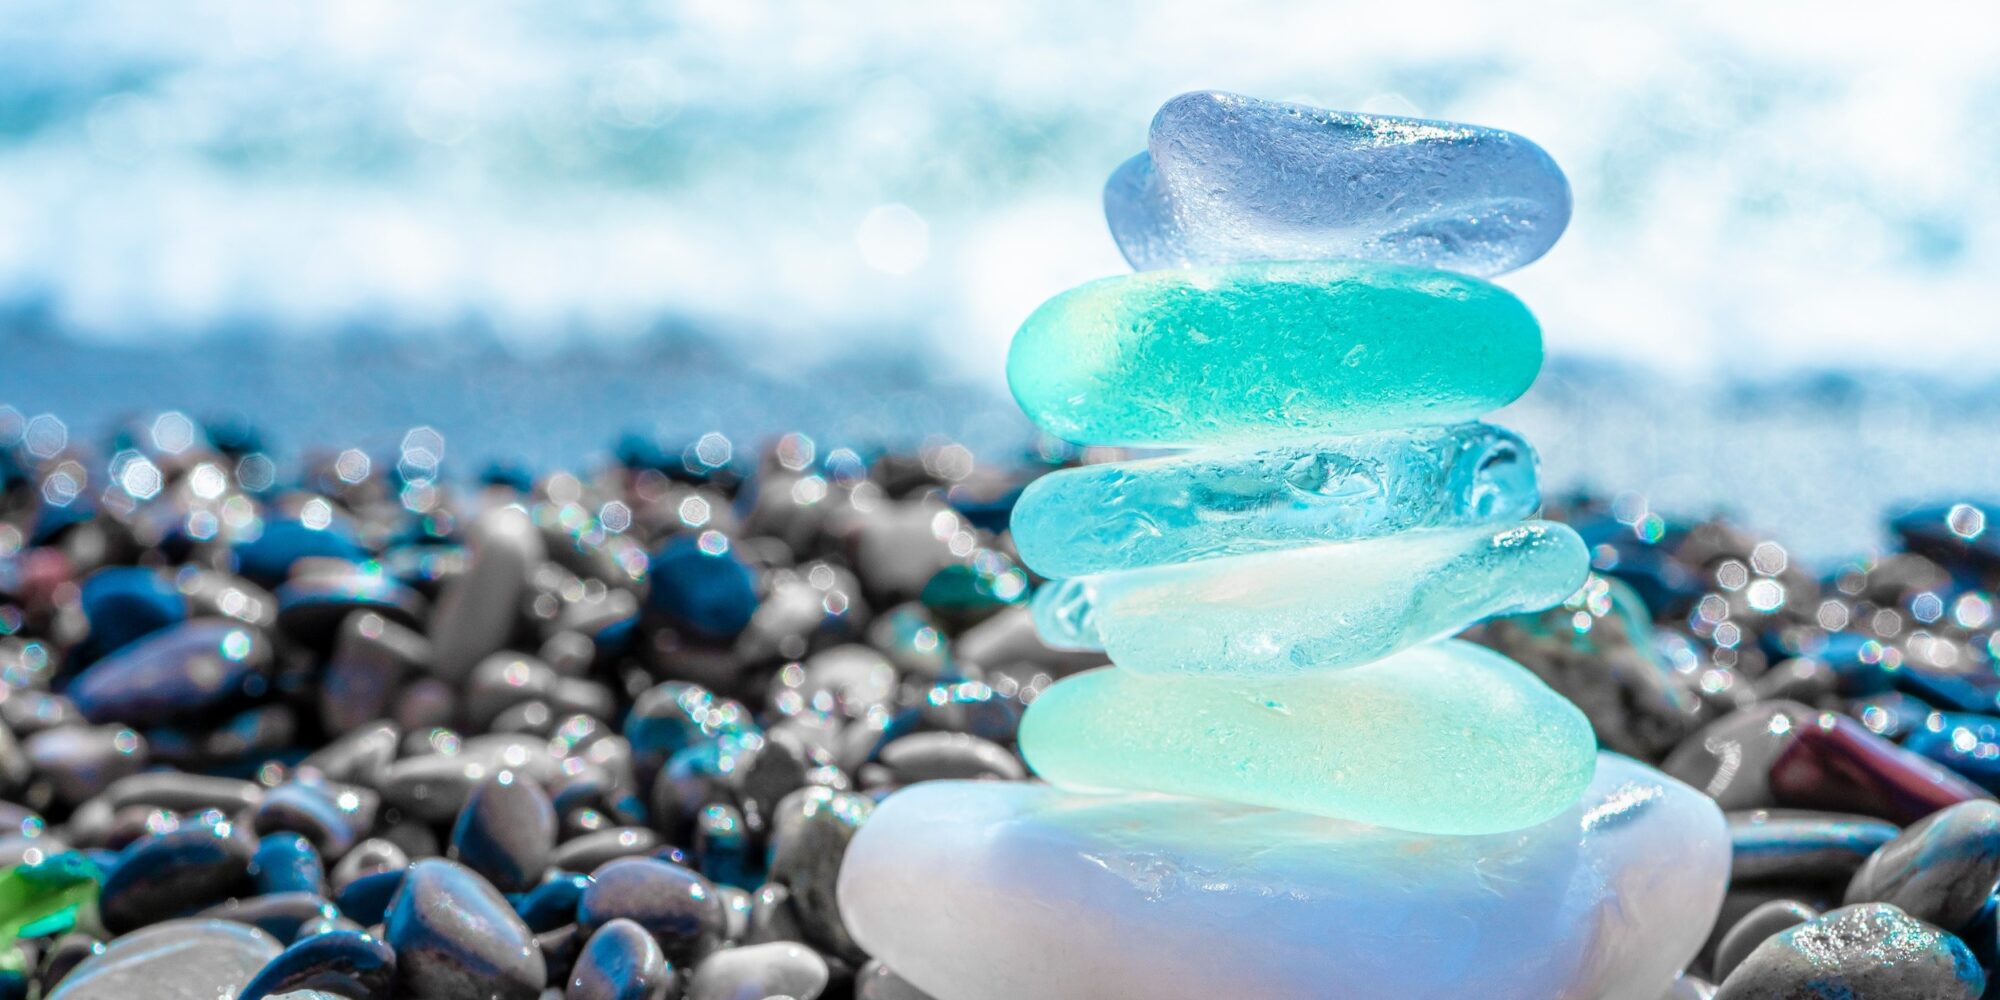 Sea glass stones arranged in a balance pyramid on the beach. Beautiful azure color sea with blurred seascape background. Meditation and Harmony concept